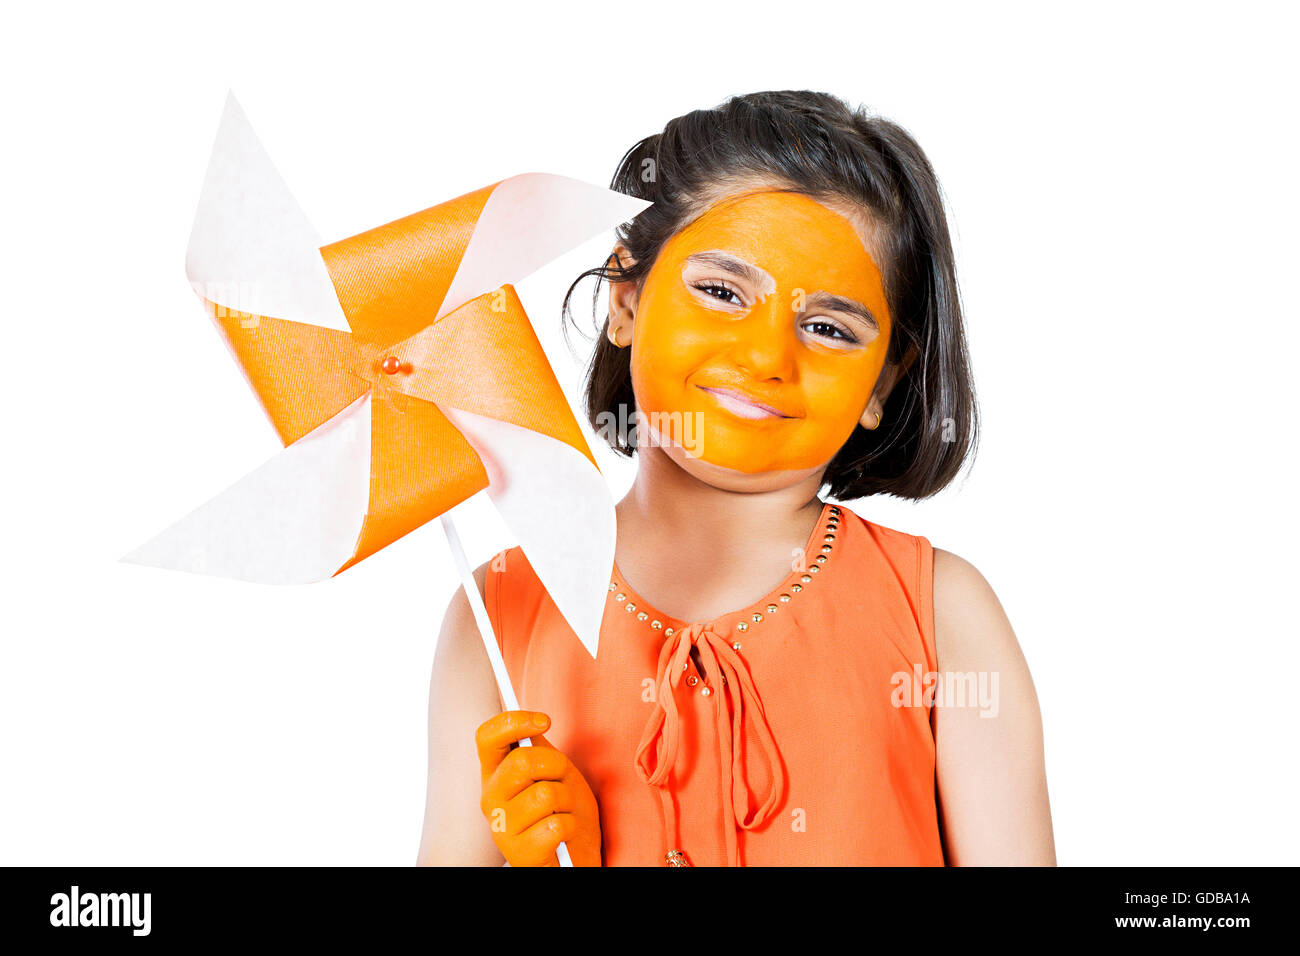 1 indian Kid girl face paint Standing and showing Pinwheel Stock Photo